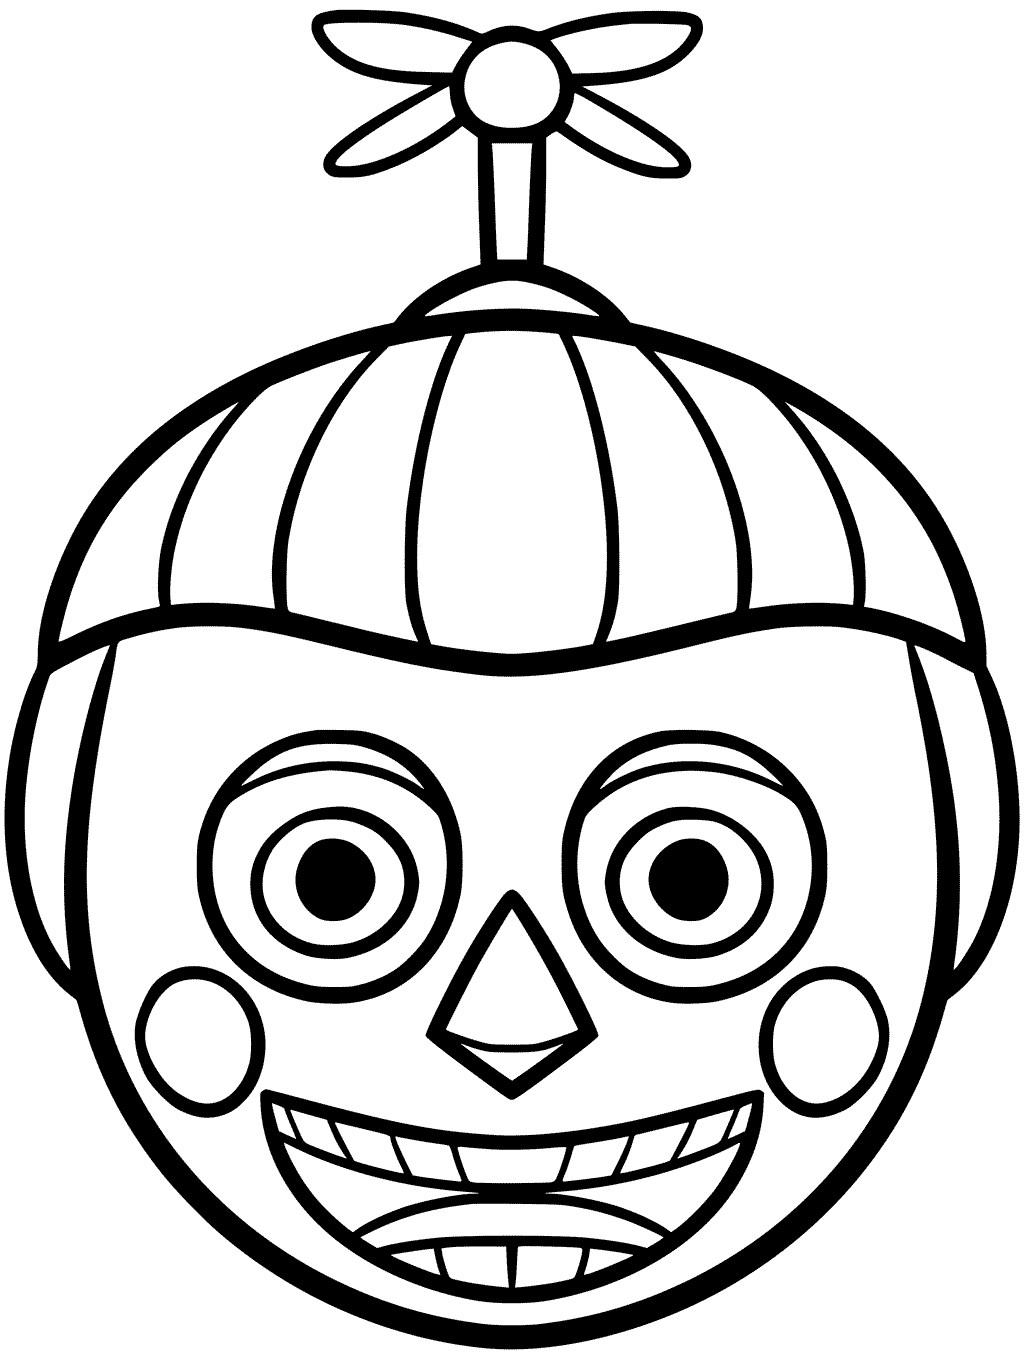 Chica Coloring Pages at GetColorings.com | Free printable colorings